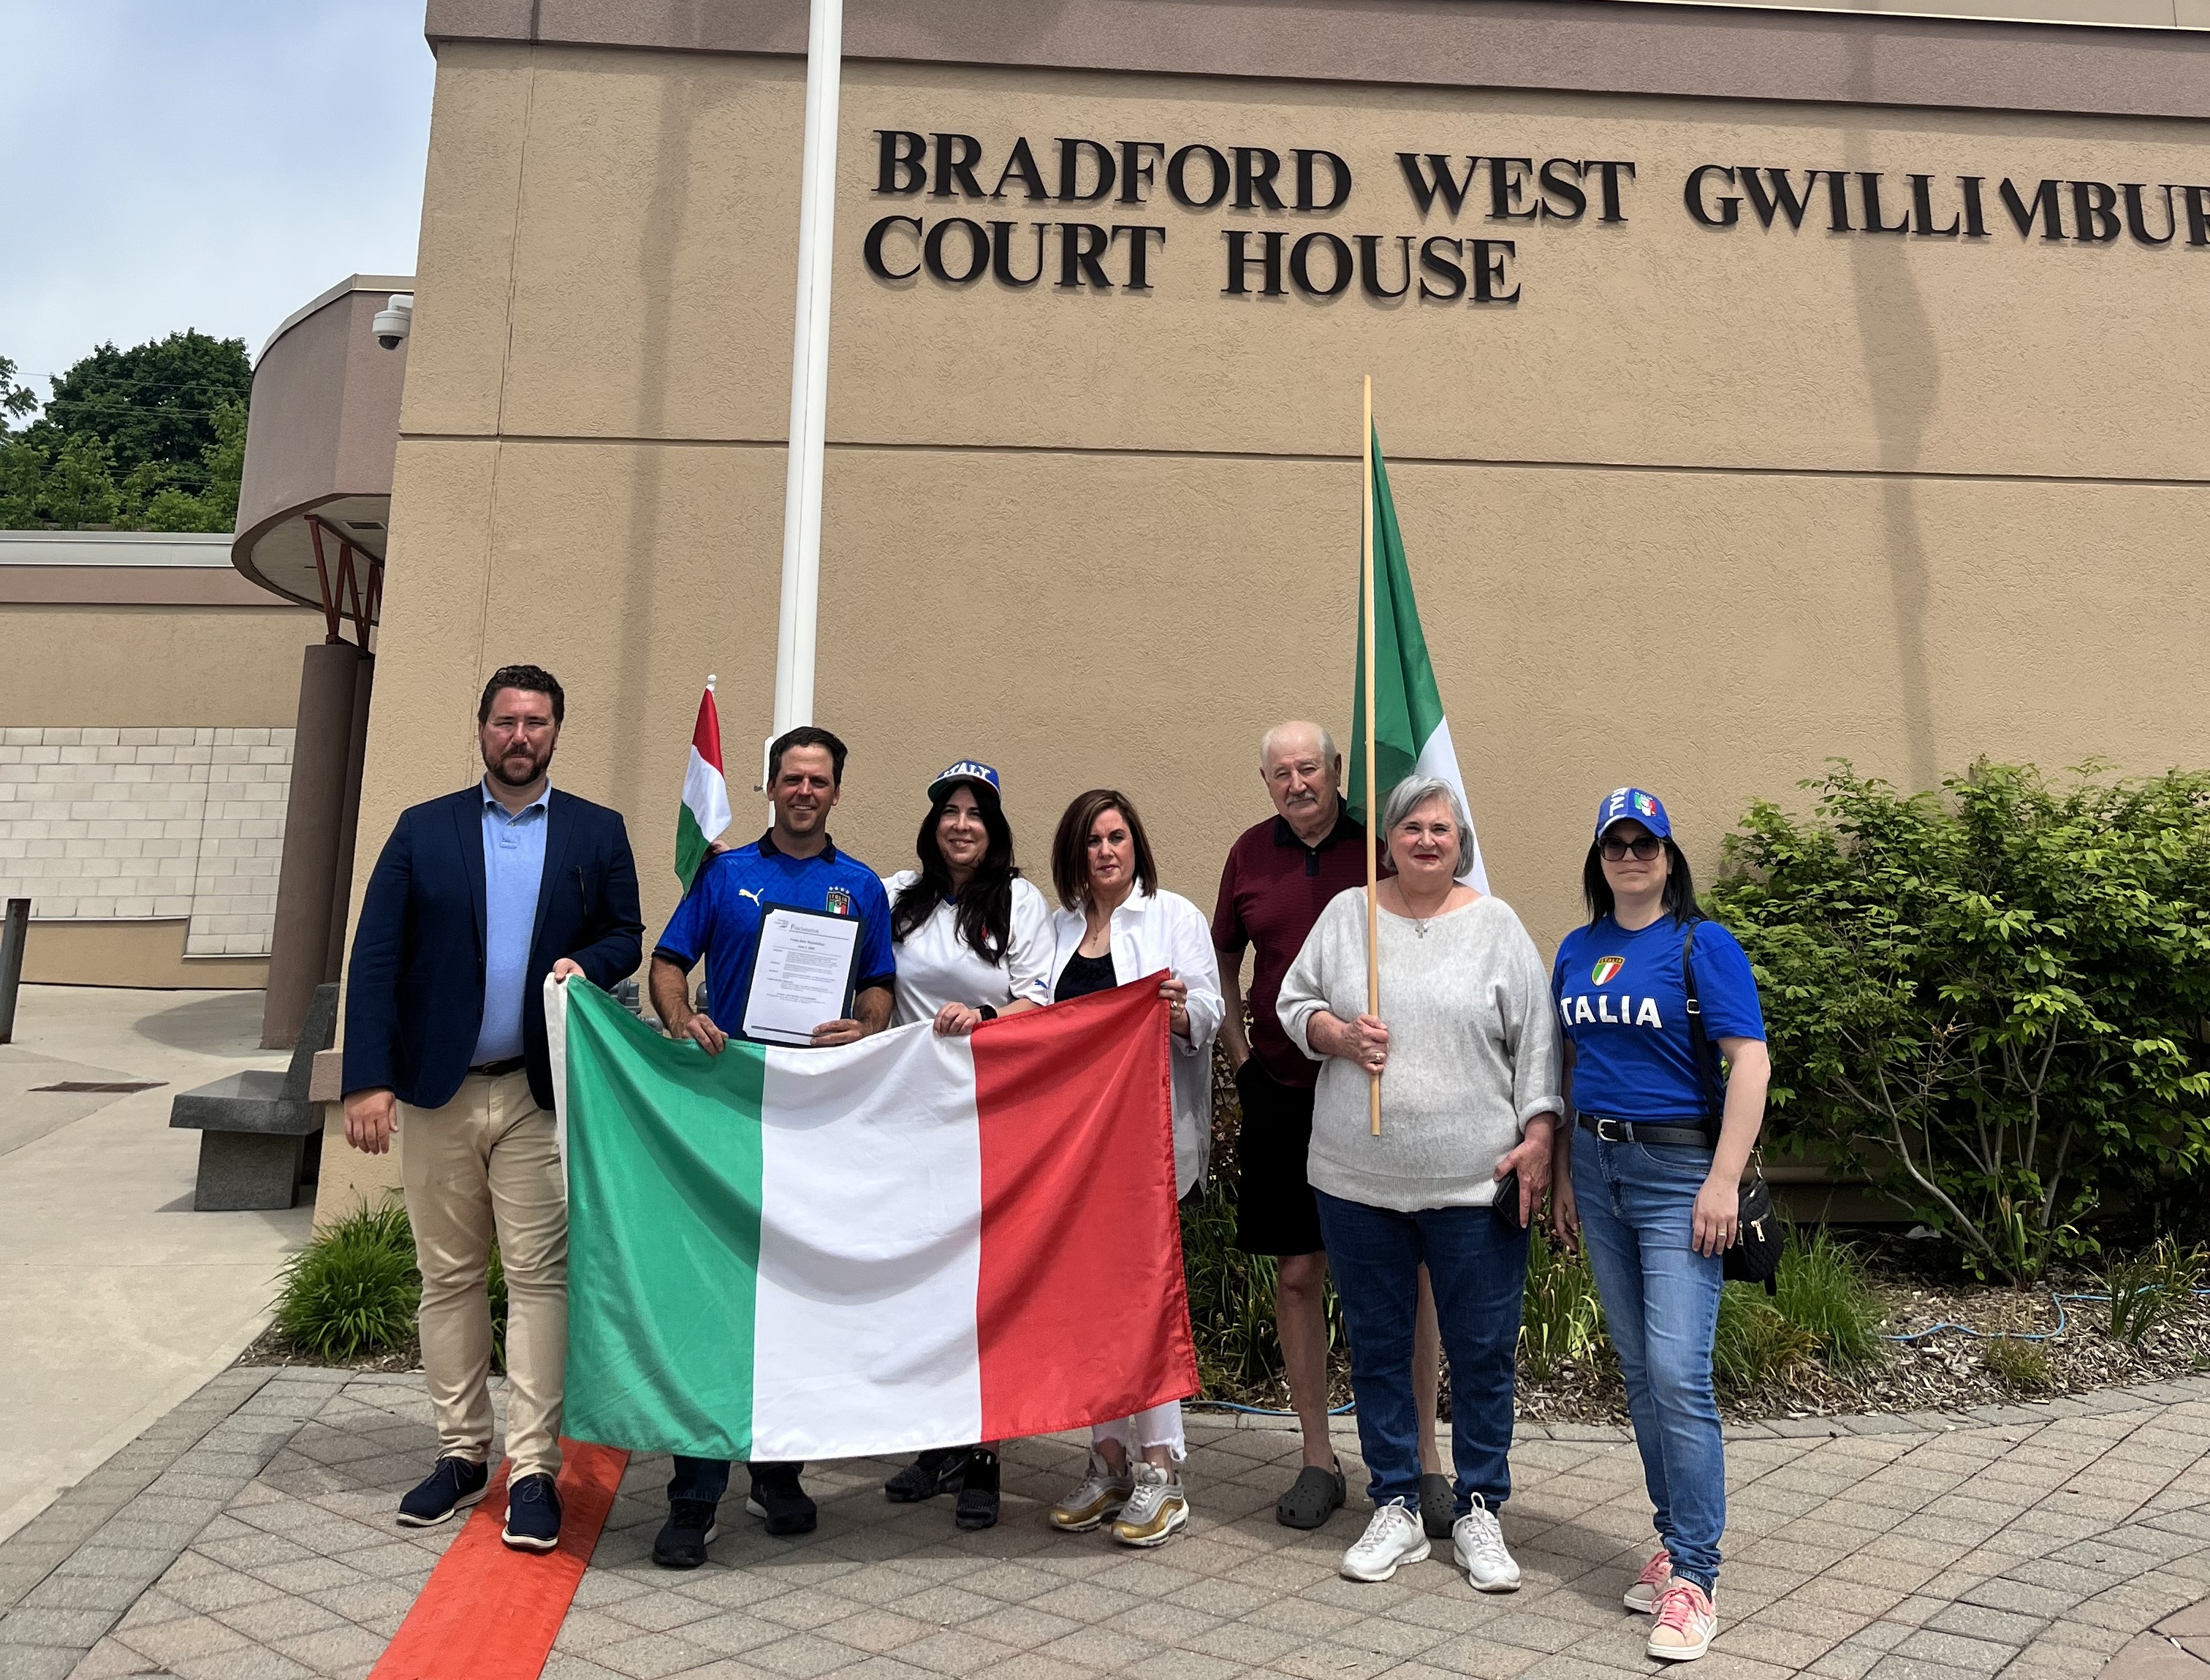 Council and community members at the 2022 Italian flag raising event